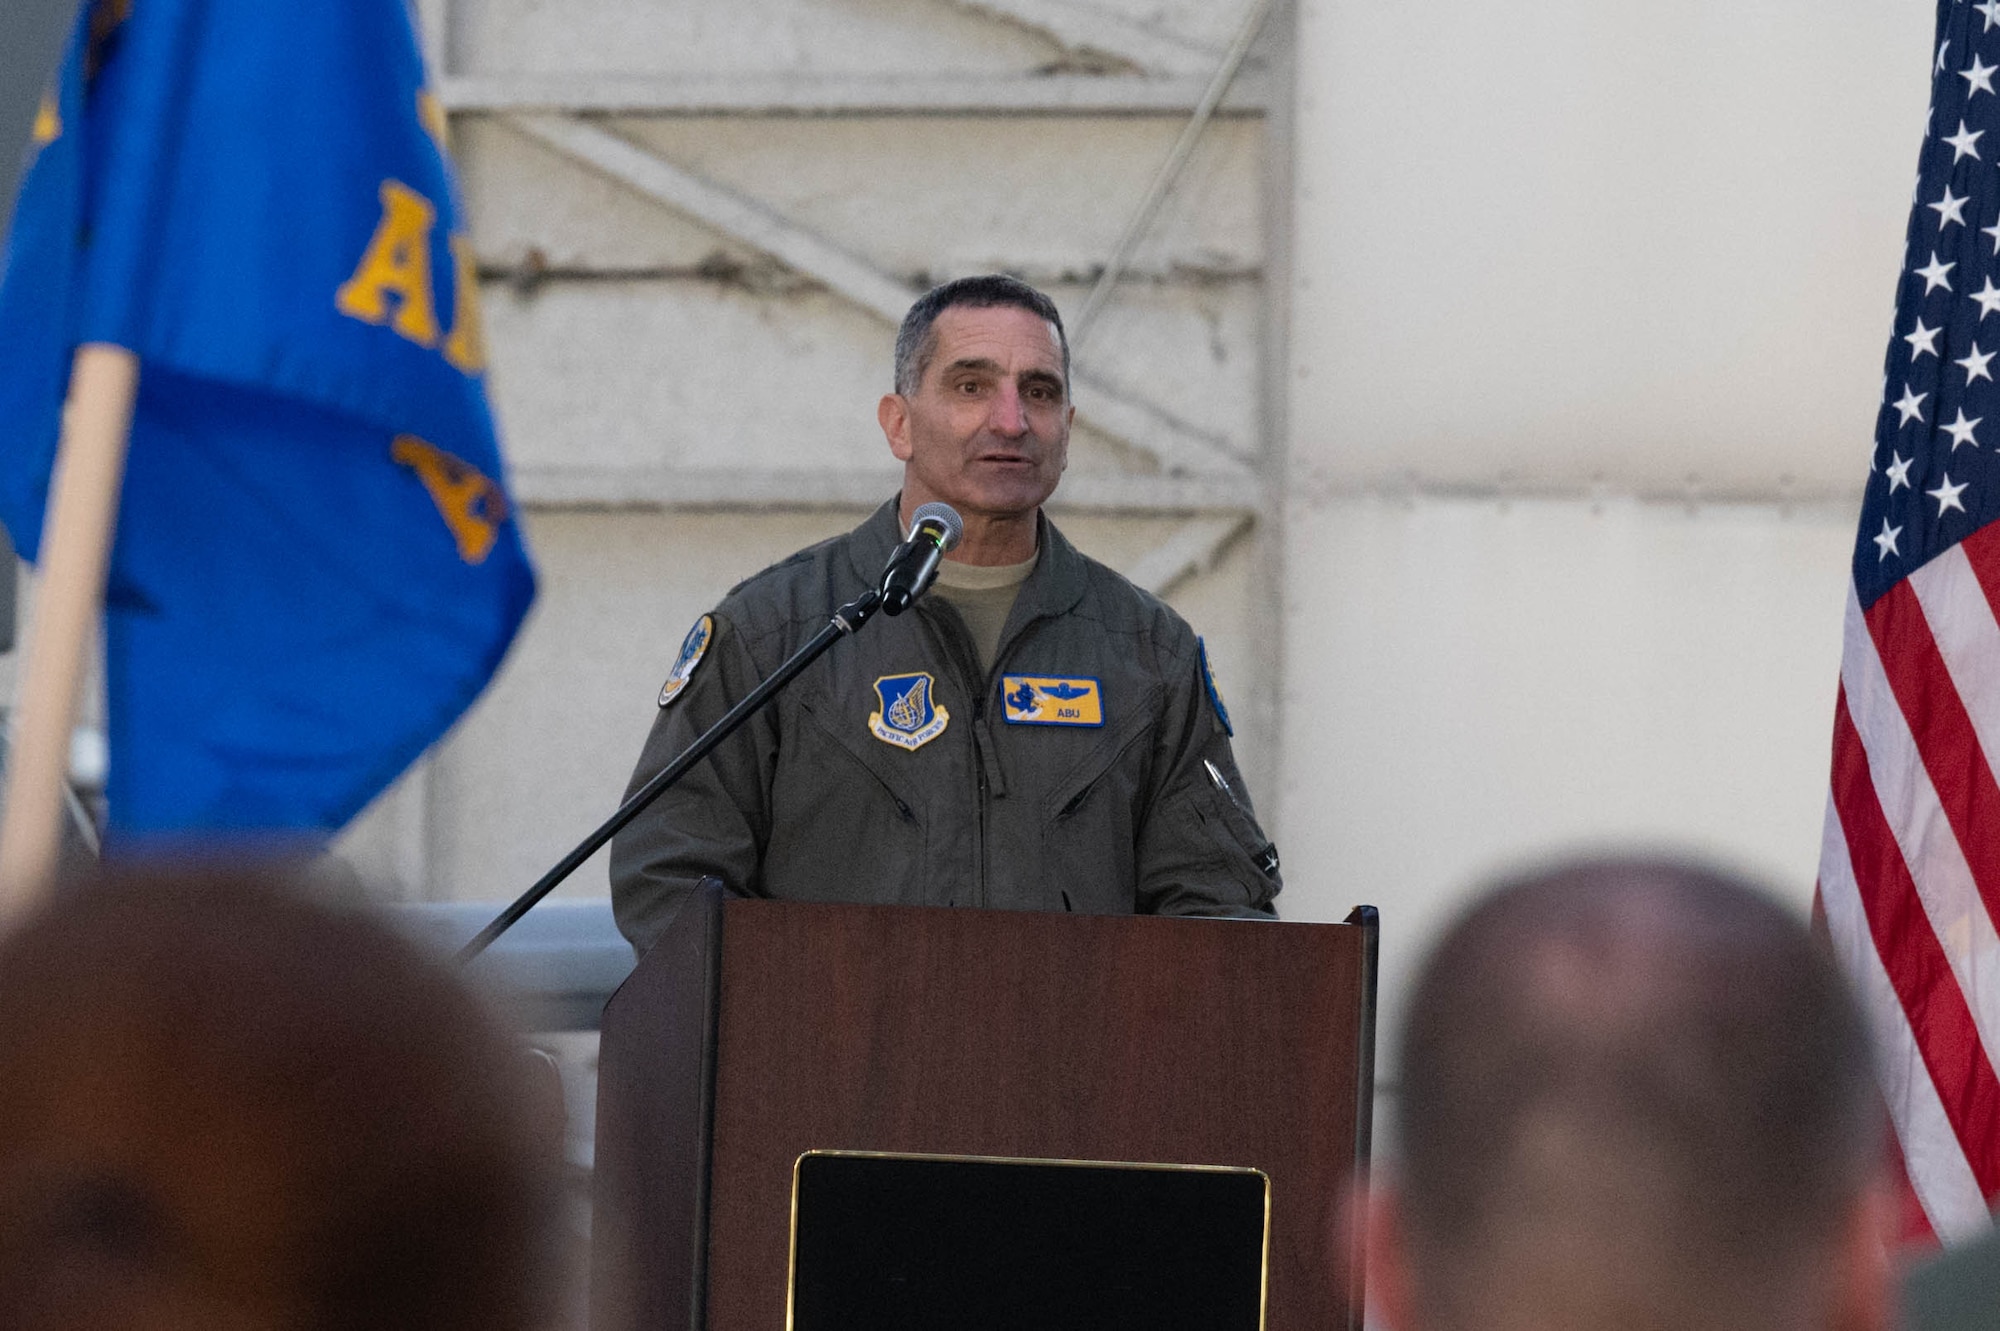 A U.S. Air Force general addresses the crowd during a redesignation ceremony at Eielson Air Force Base, Alaska.